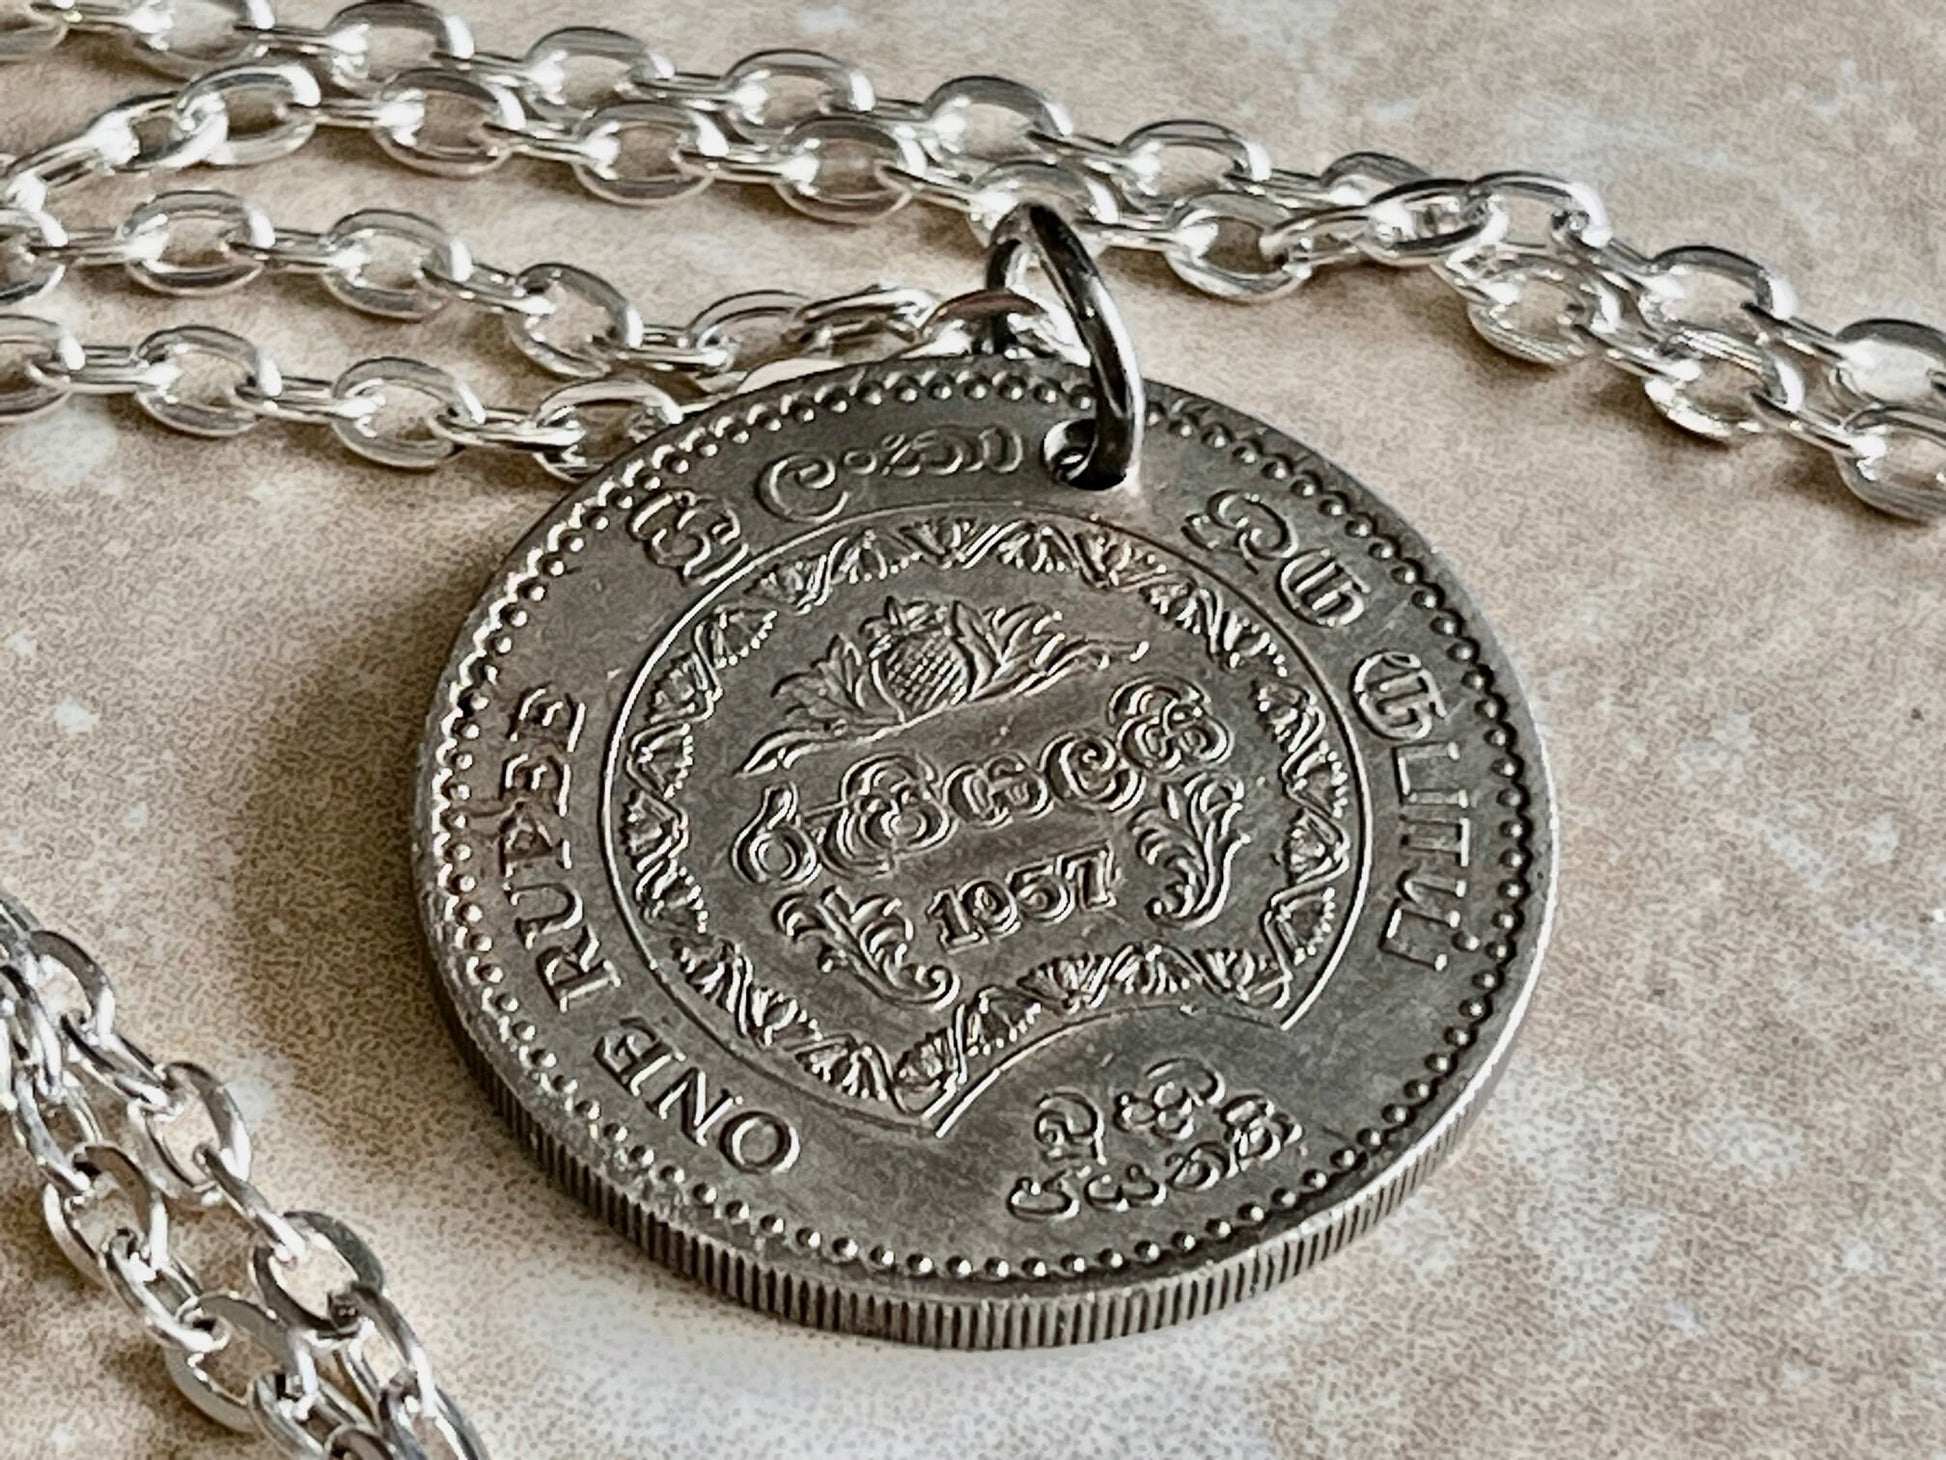 India Coin Pendant 1957 East India 1 Rupee Personal Vintage Handmade Jewelry Gift Friend Charm For Him Her World Coin Collector